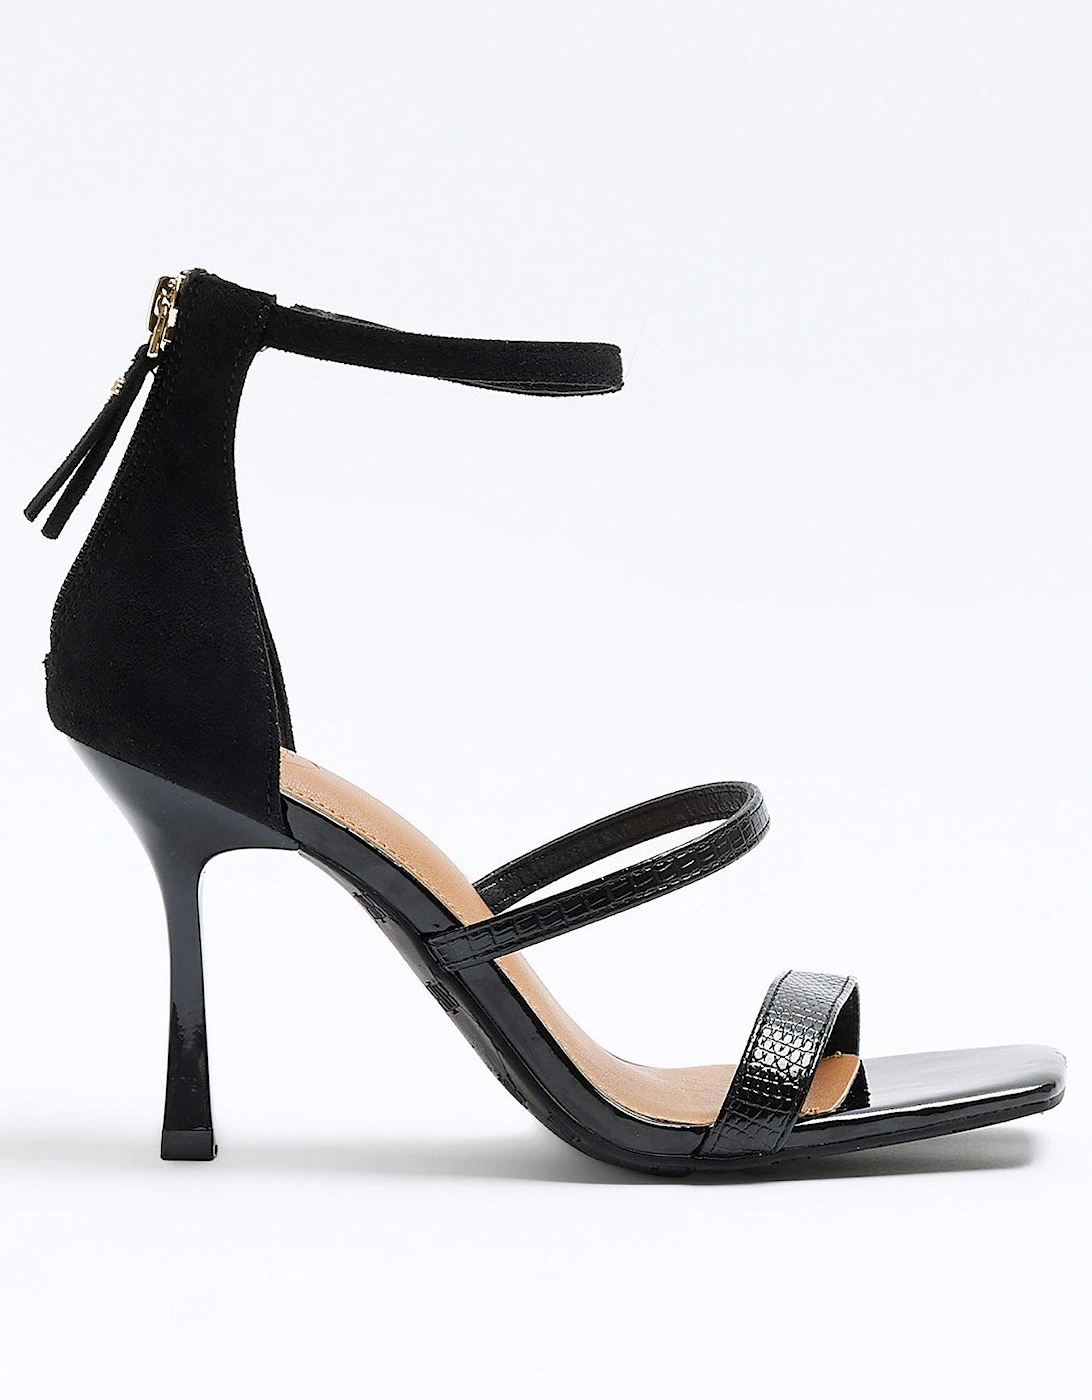 Barely There Closed Toe Heel - Black, 6 of 5